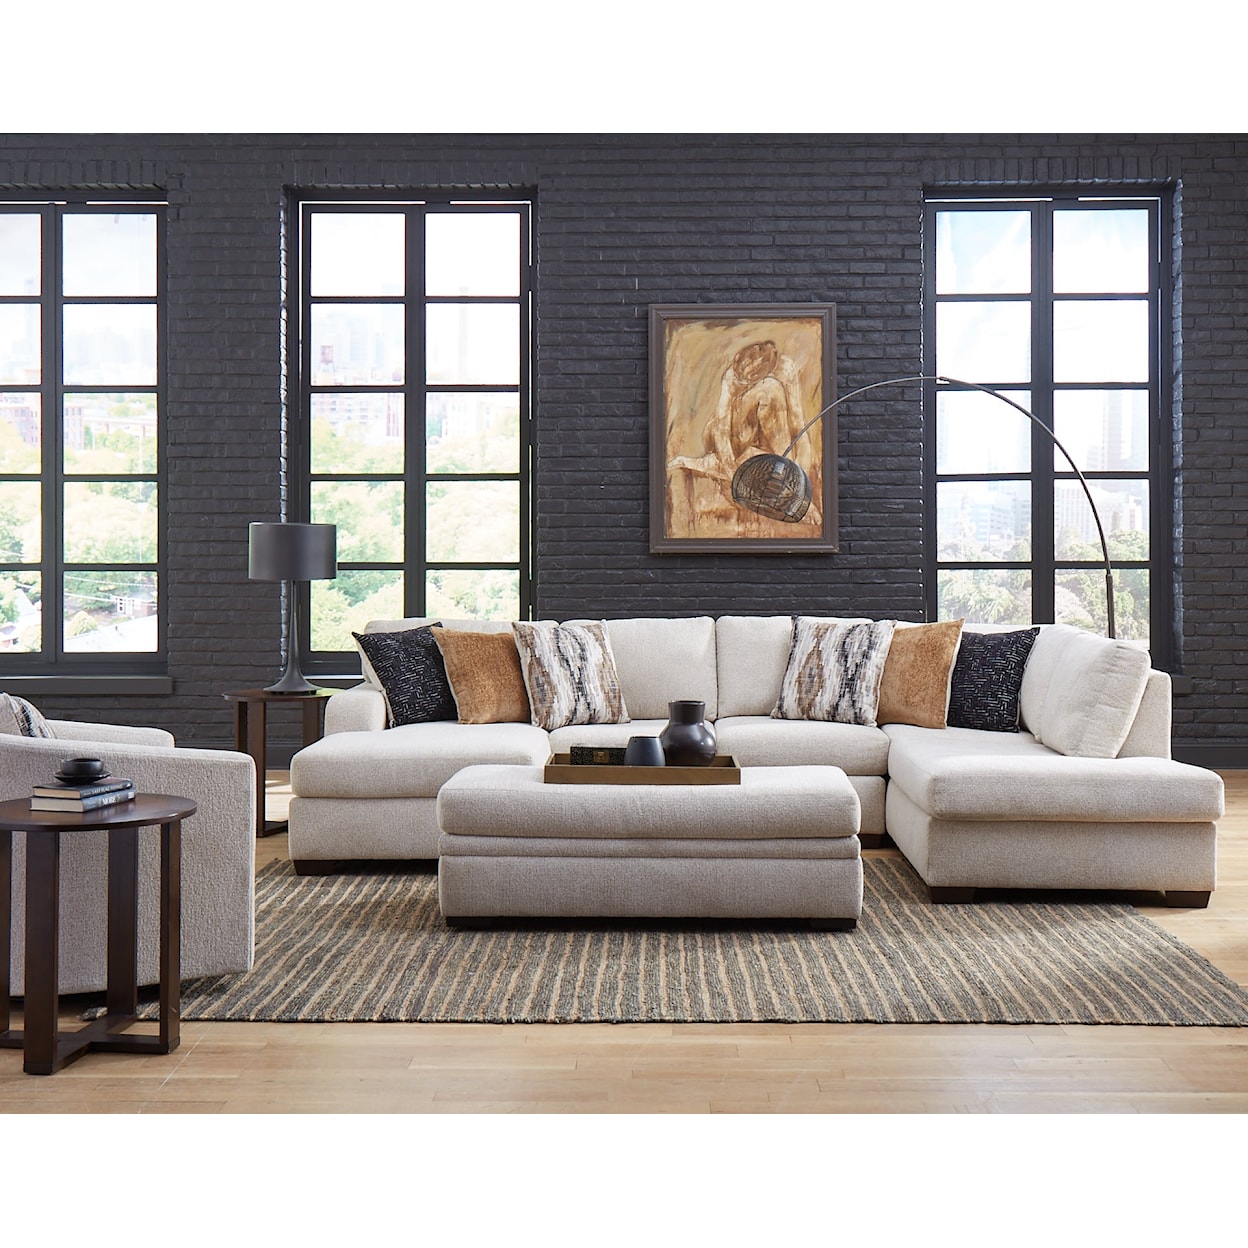 Behold Home Turin Beige TURIN BEIGE 2 PIECE SECTIONAL |